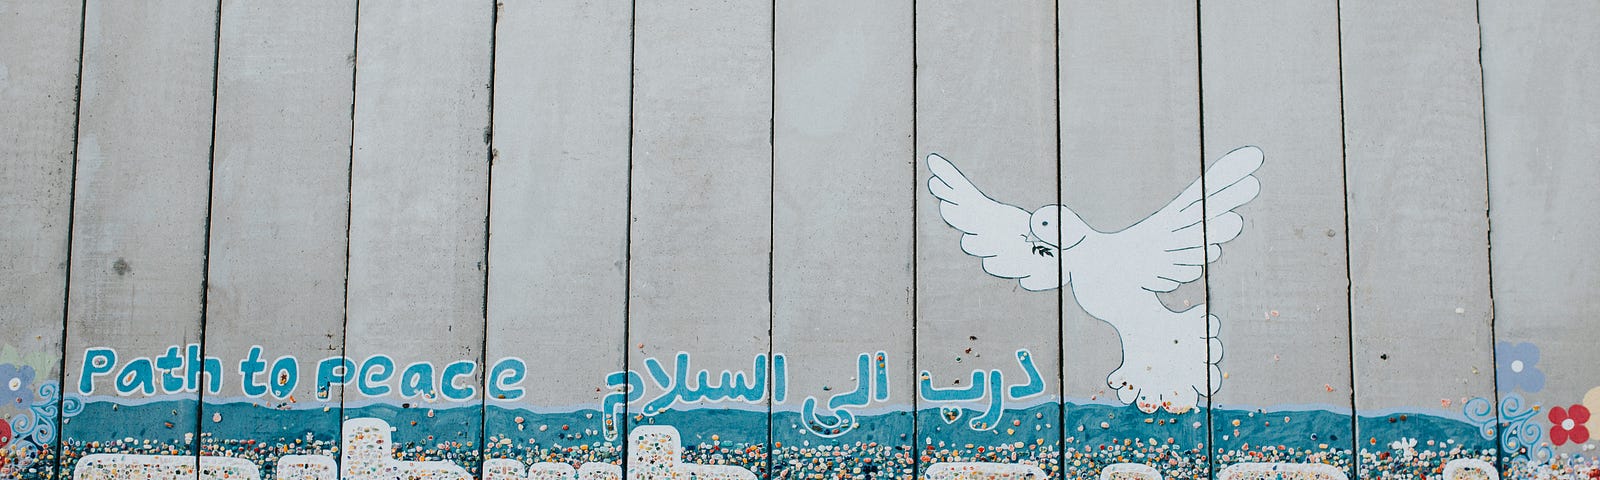 Image of a peace mural on the border between Israel and Gaza Strip | Photo by Cole Keister on Unsplash